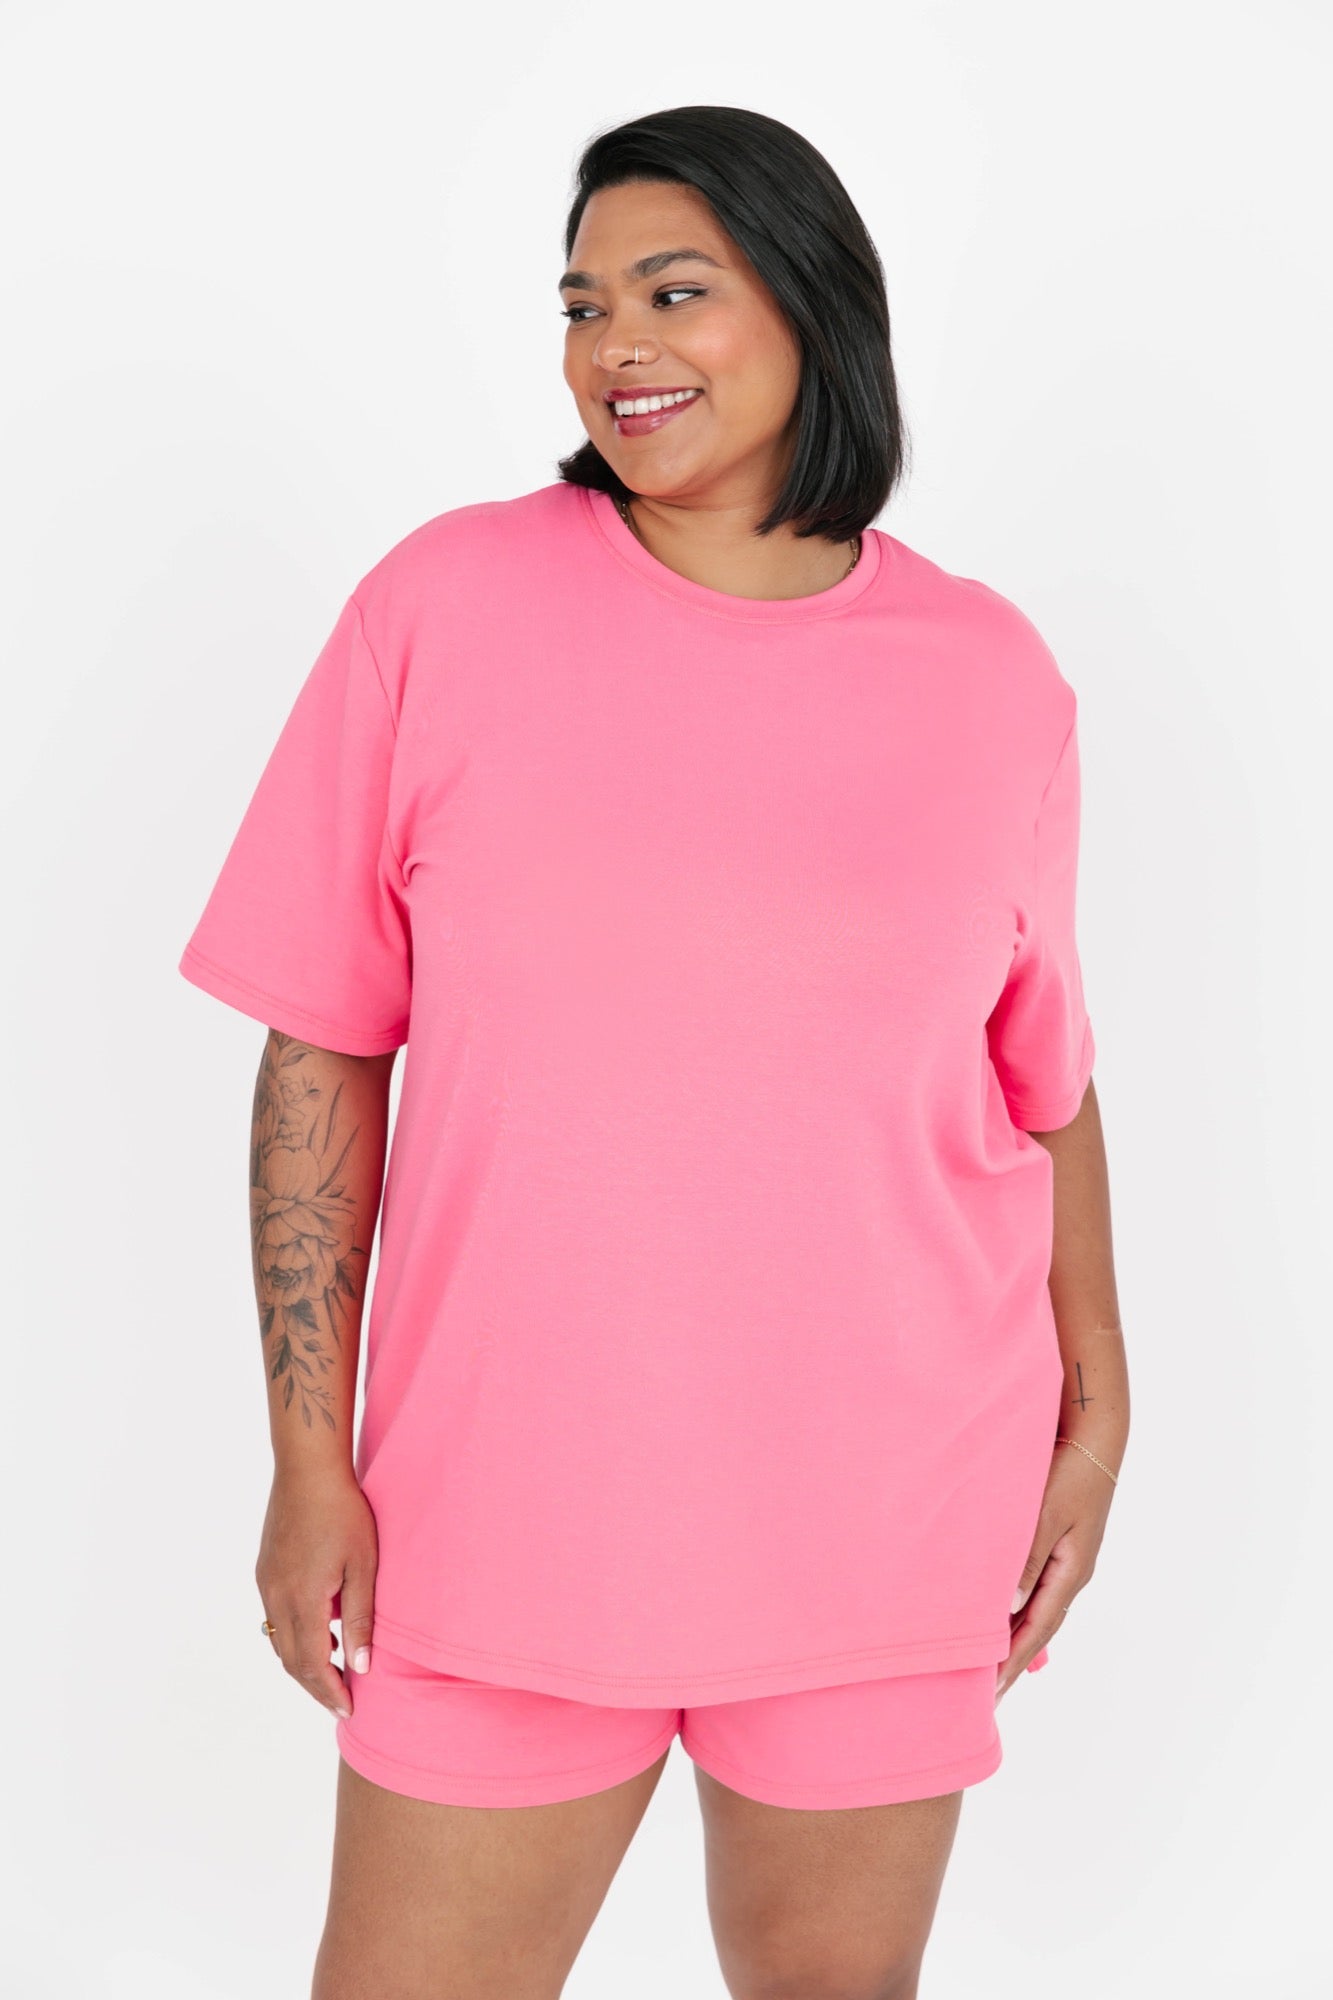 Hang Out Tee in Ginger Pink